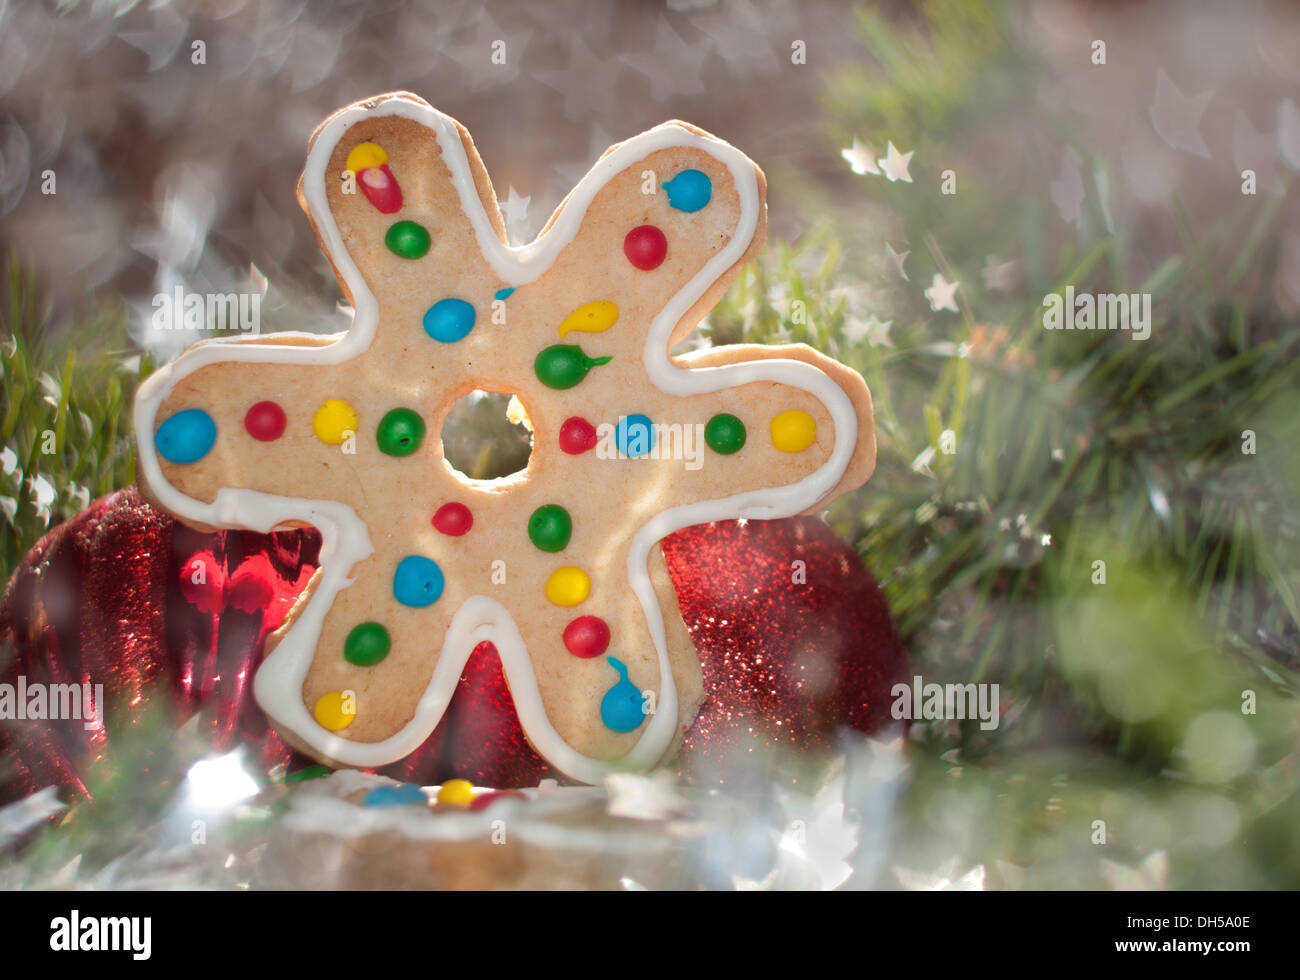 Colorful Christmas cookie on a dreamy background with bokeh stars Stock Photo